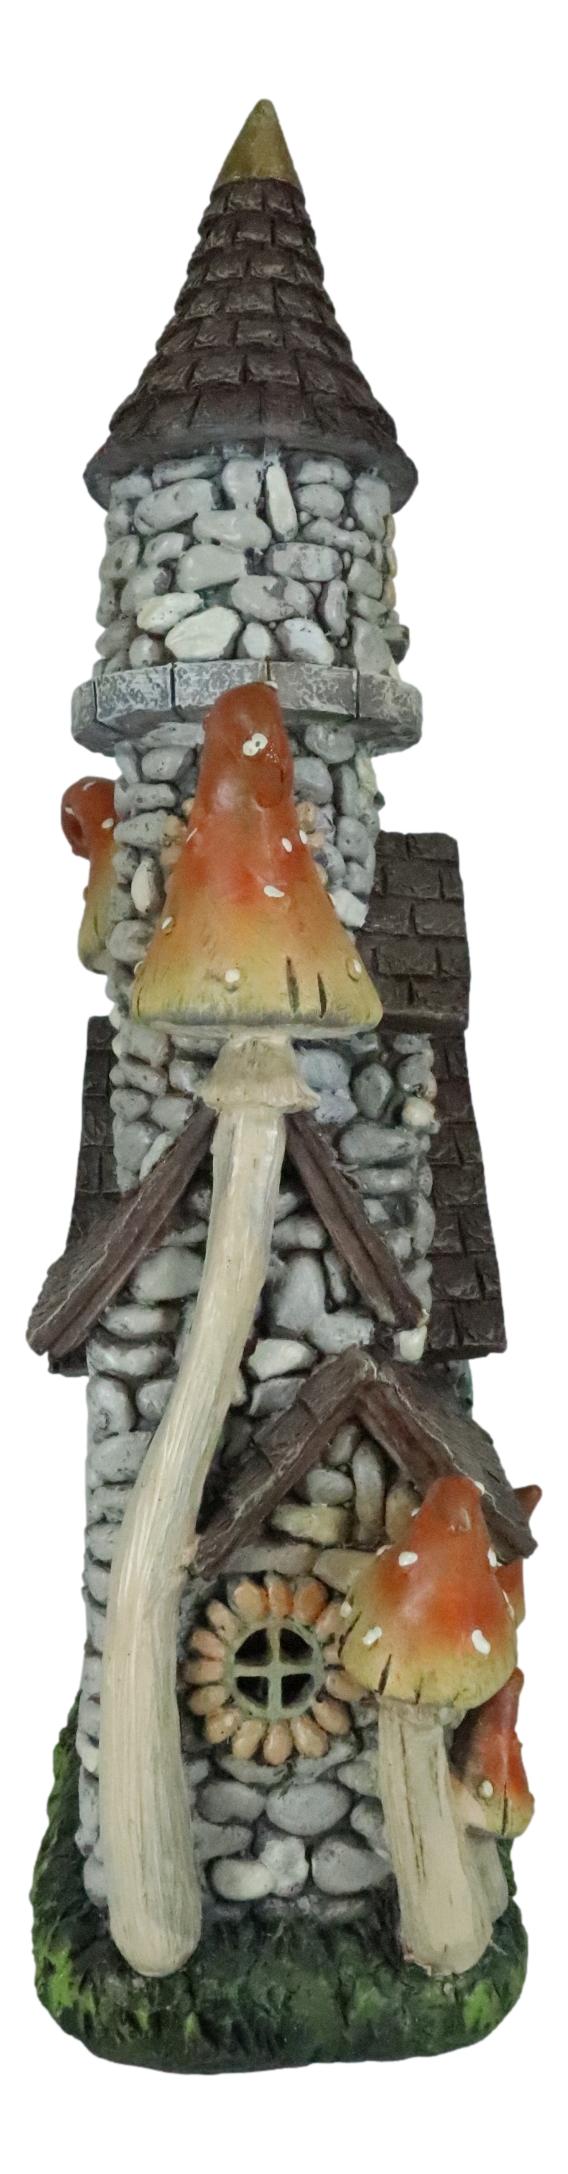 Fairy Garden LED Light Up Castle Stone House With Tall Tower Roofs Figurine